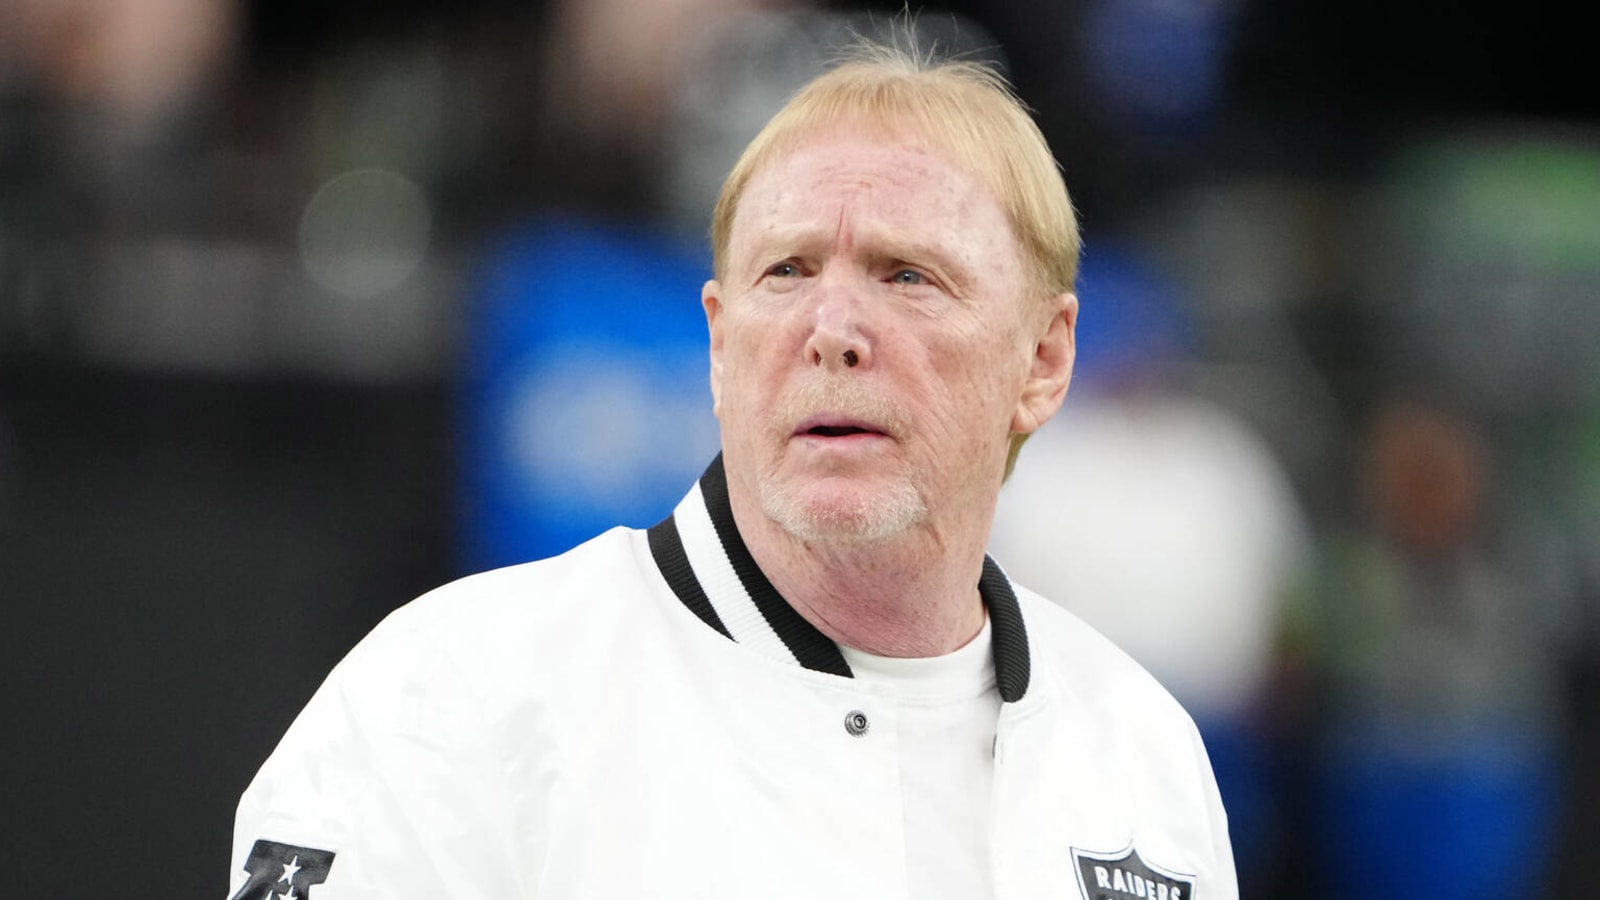 Raiders owner provides update on head-coaching search